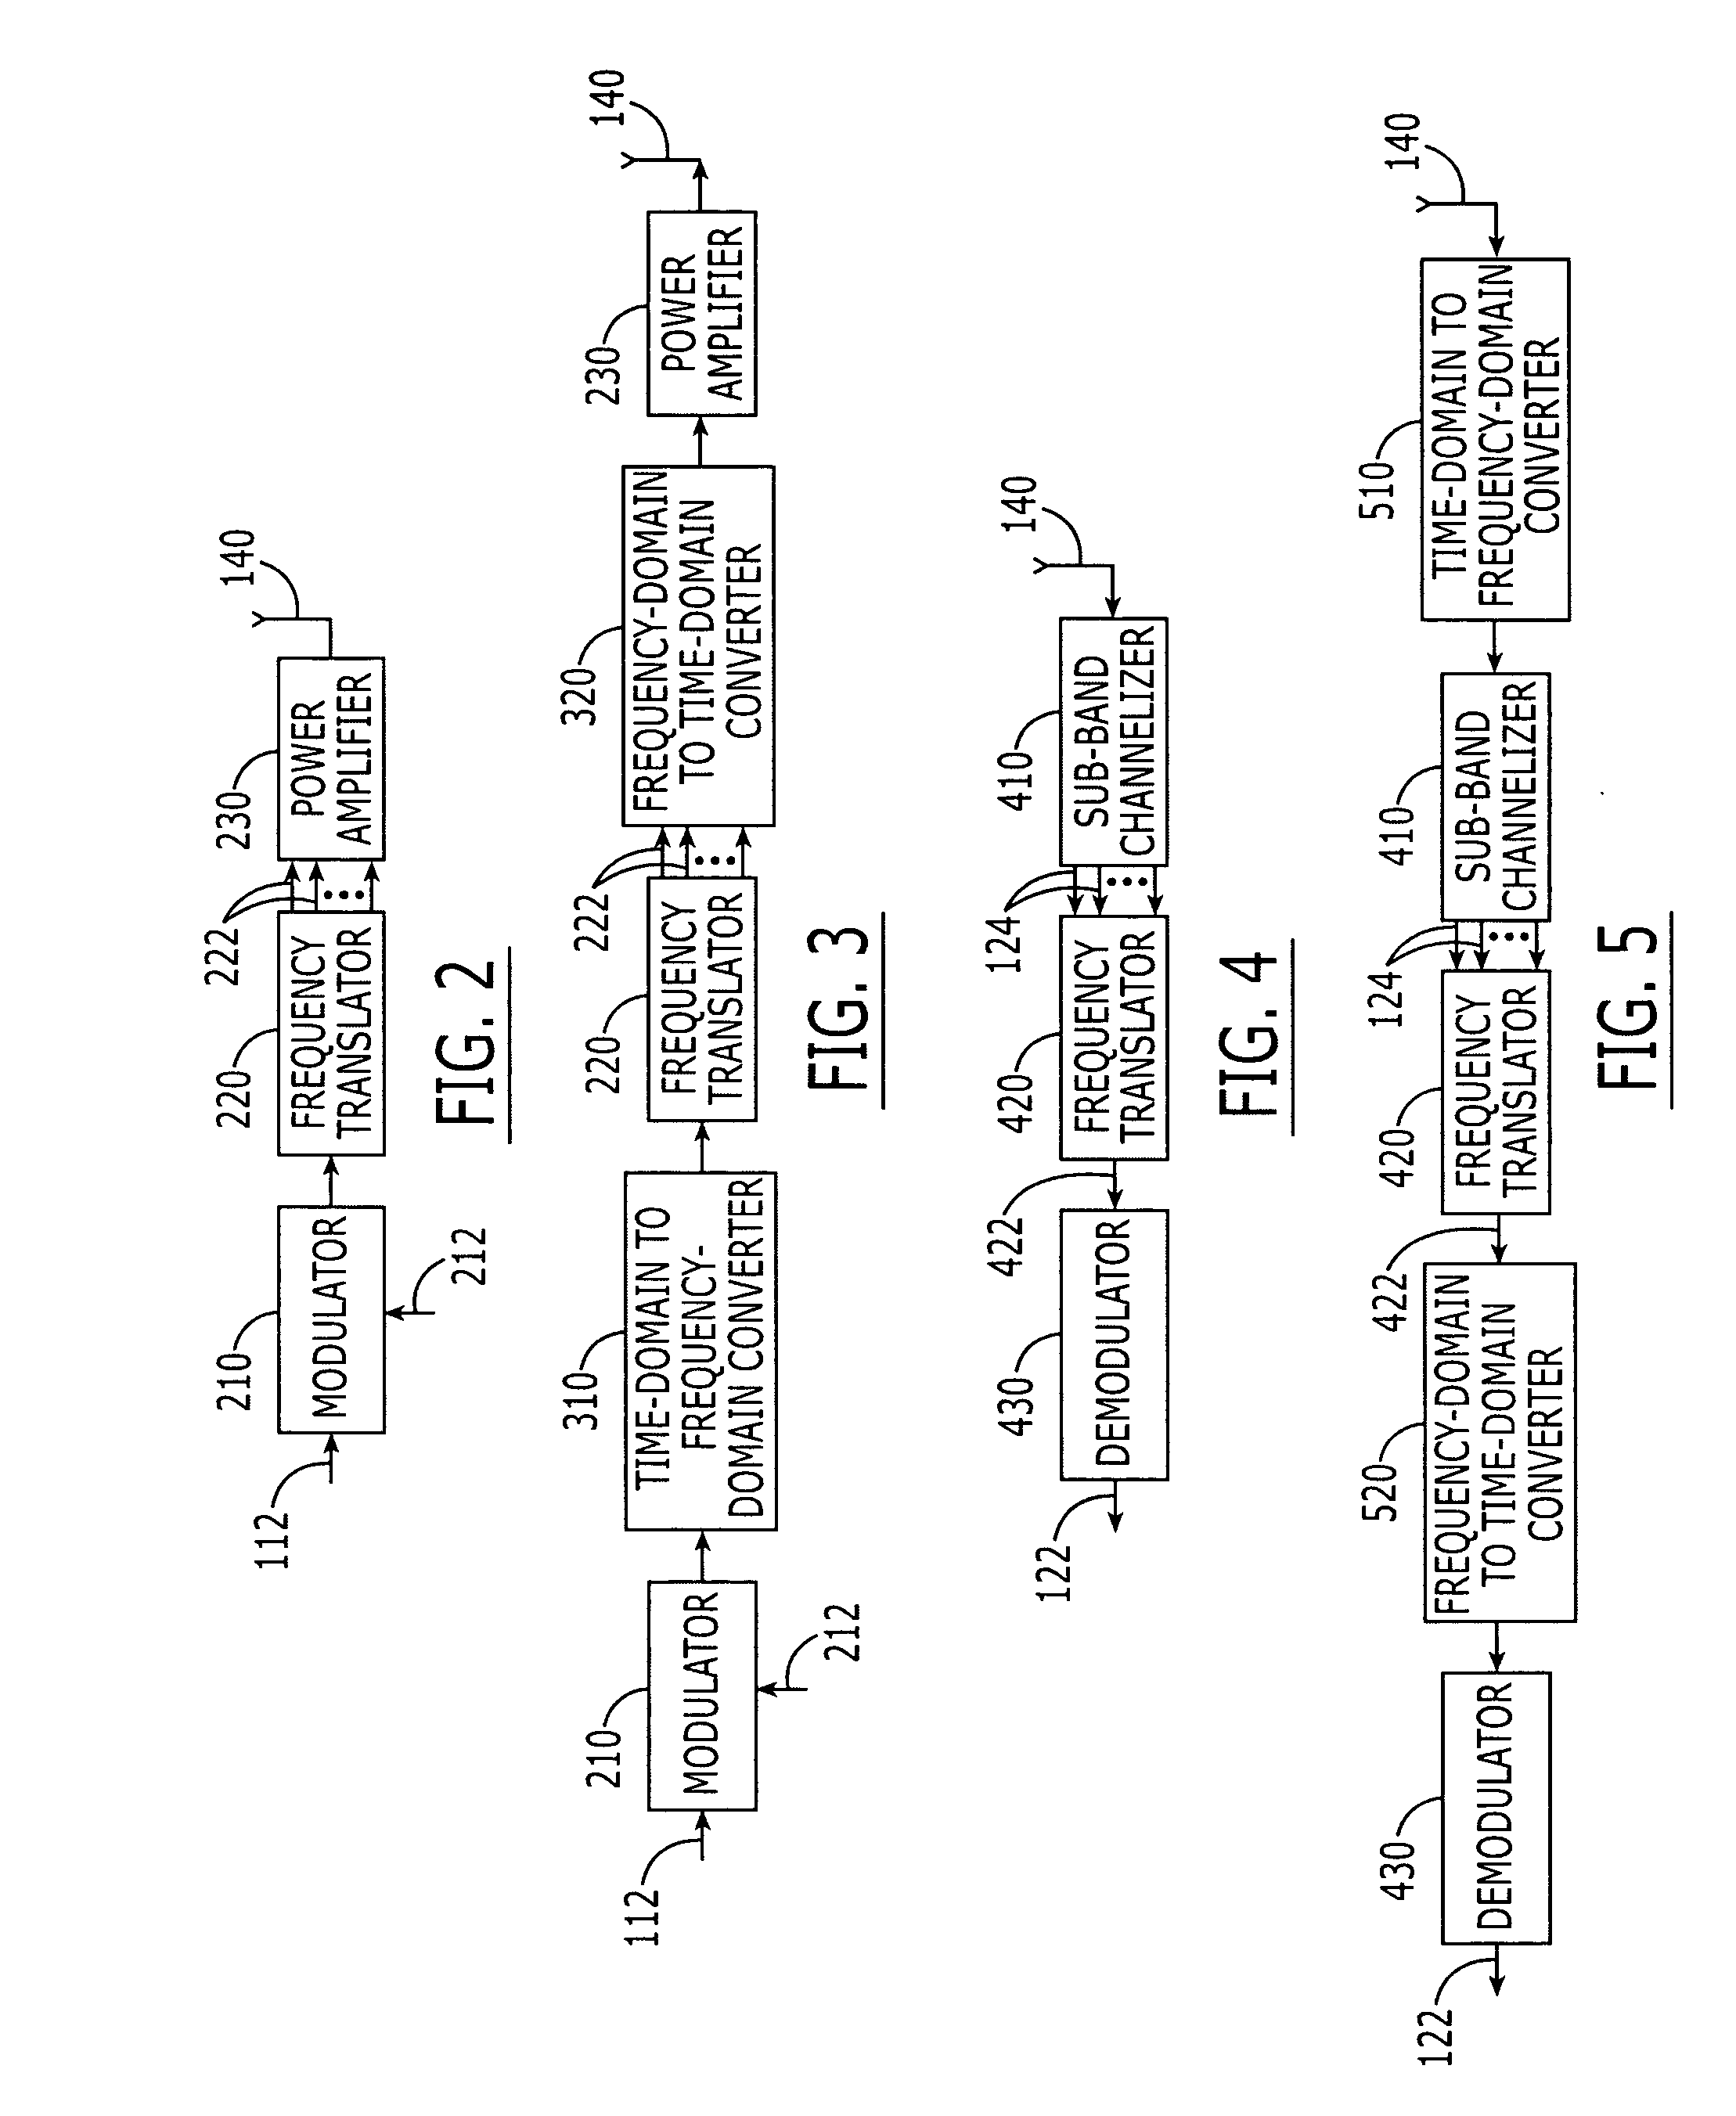 Broadband wireless communications systems and methods using multiple non-contiguous frequency bands/segments